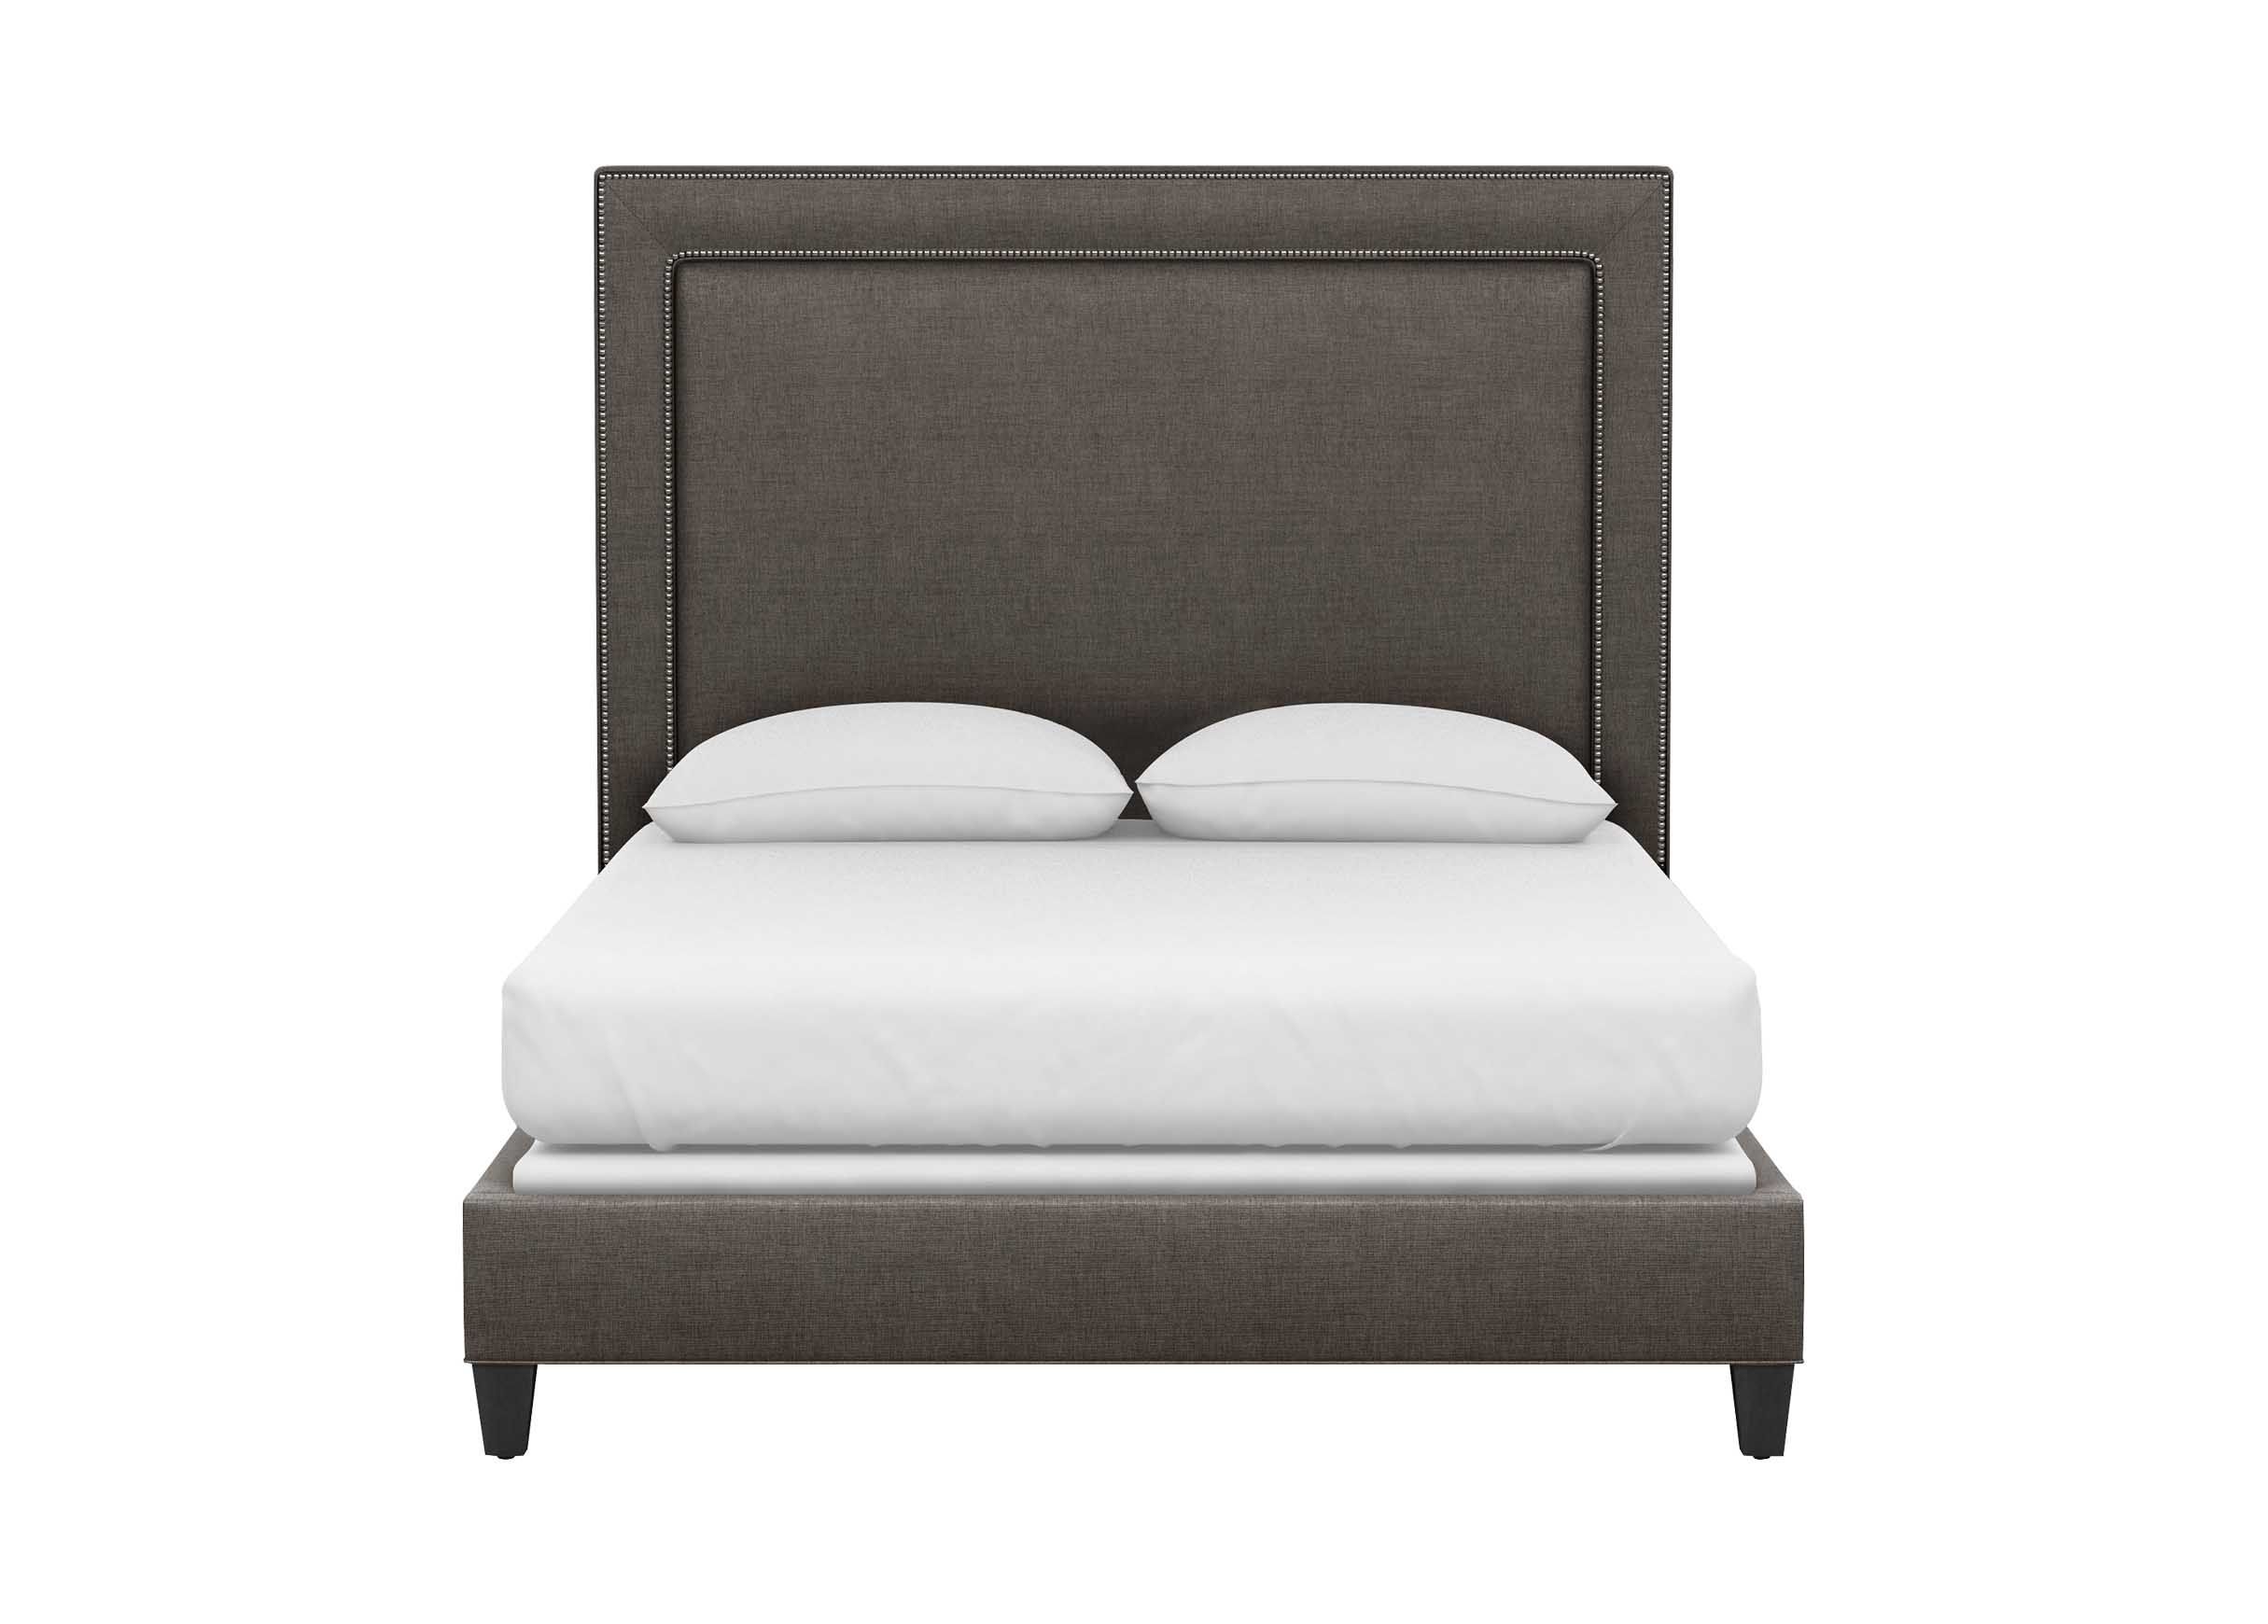 Jensen Bed | Ethan Allen For Most Recently Released Jensen 5 Piece Counter Sets (View 12 of 20)